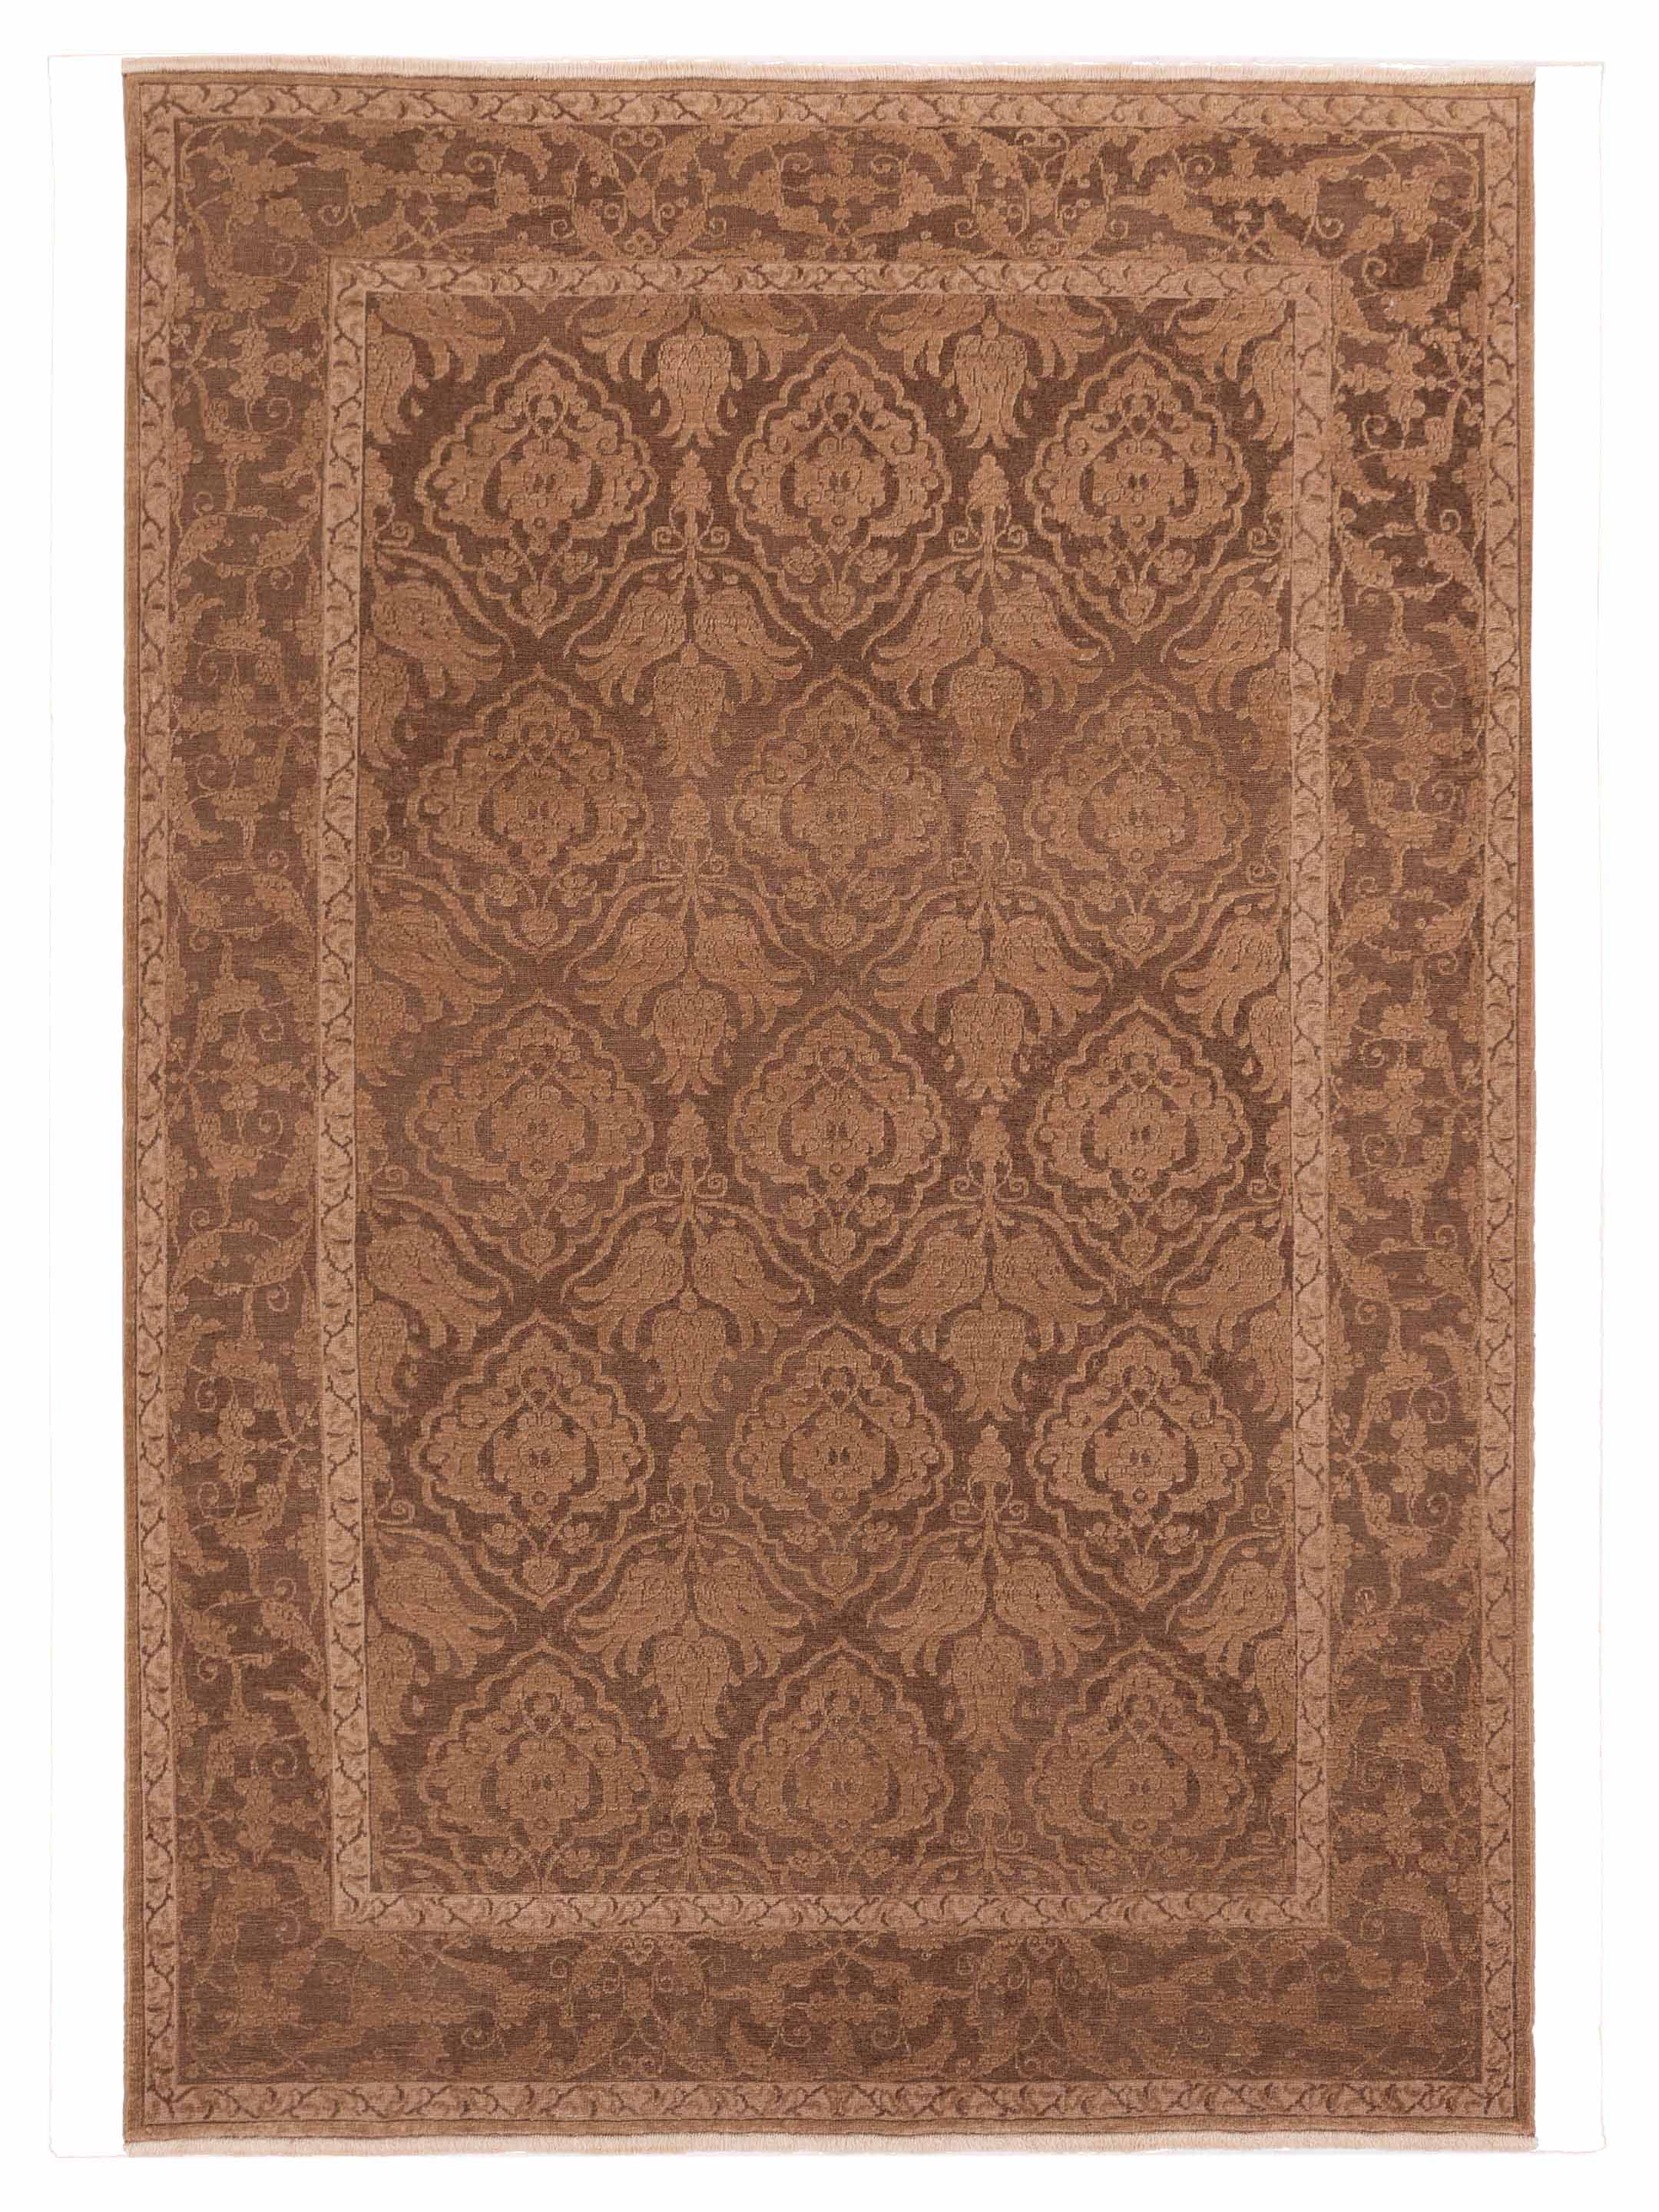 Transitional Brown Area Rug	